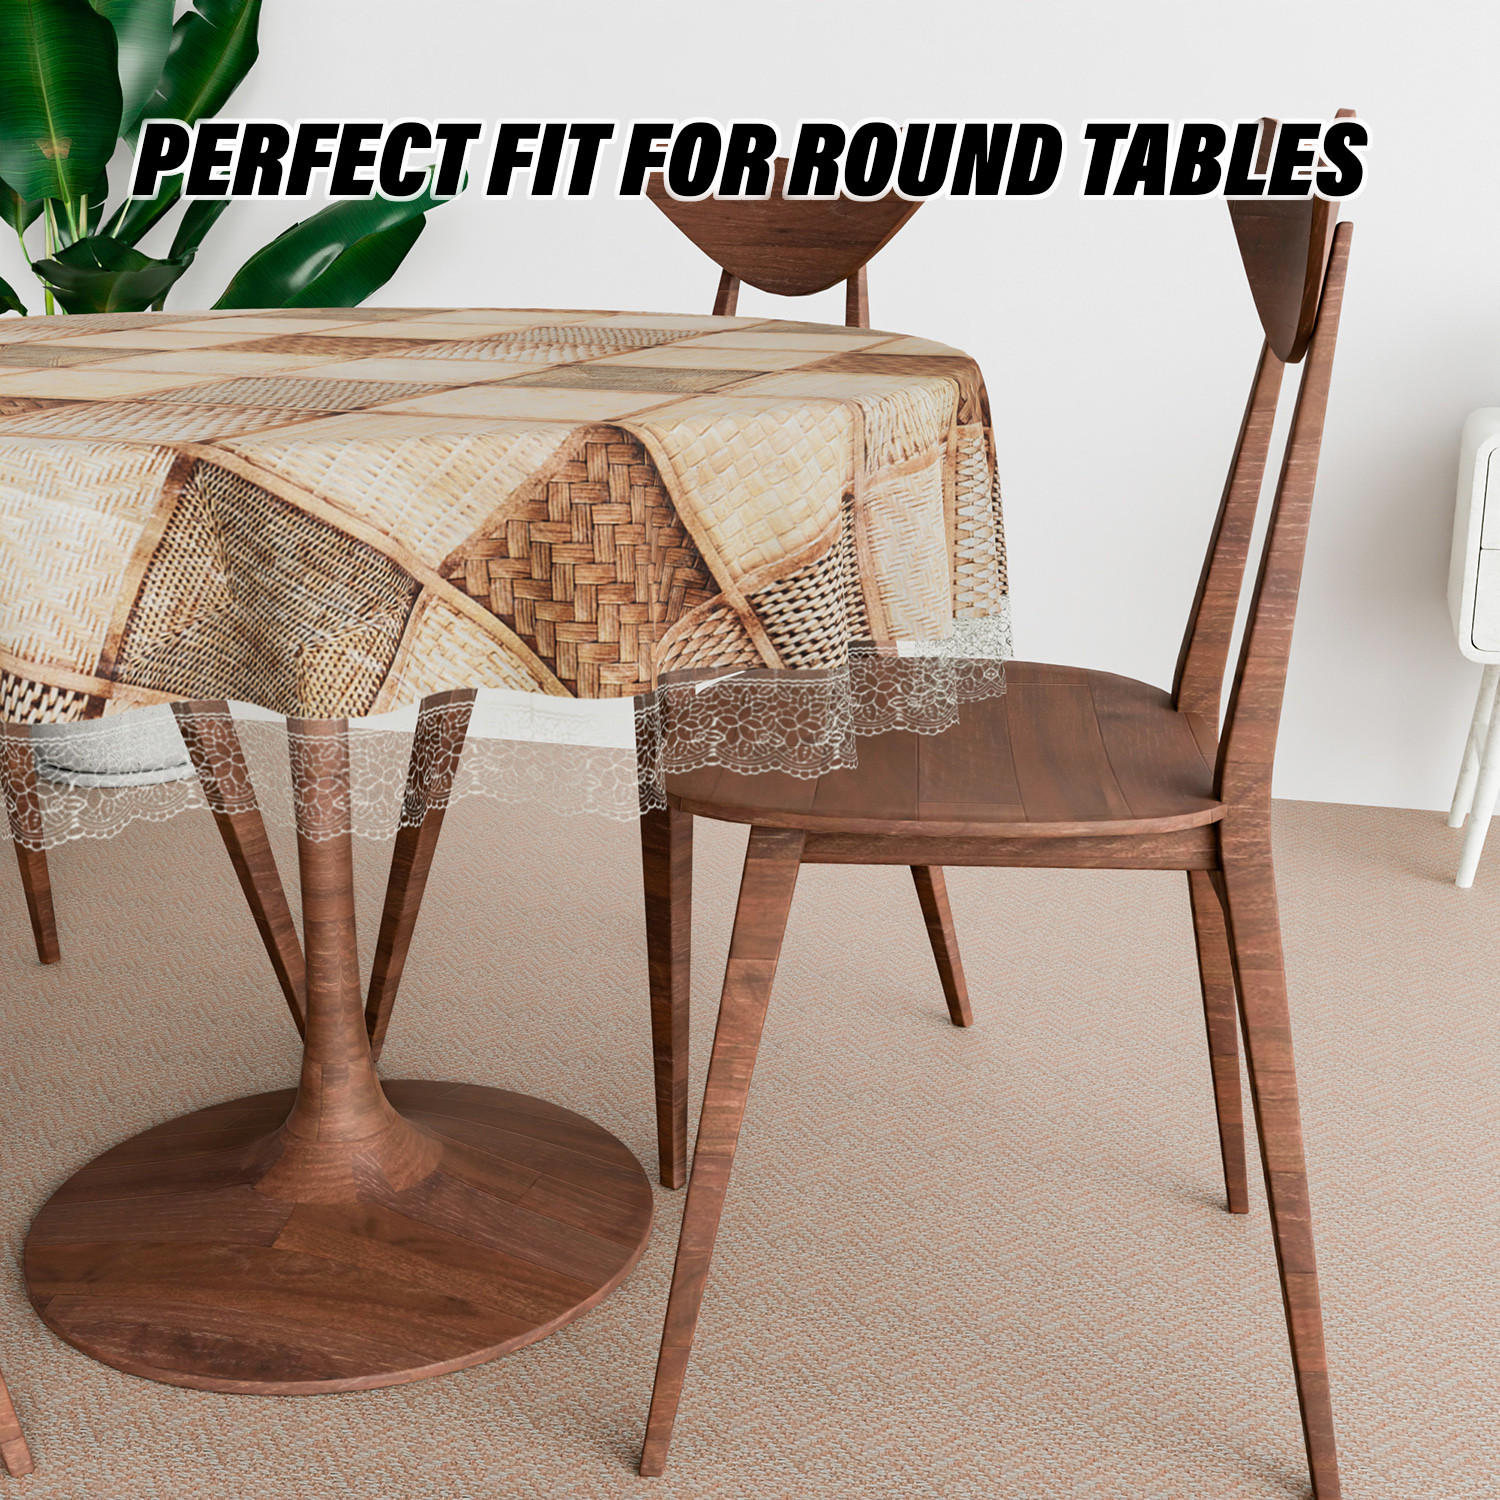 Kuber Industries Round Table Cover | Table Cloth for Round Tables | 4 Seater Round Table Cloth | Chatai Kitchen Dining Tablecloth | Tabletop Cover | 60 Inch | Brown